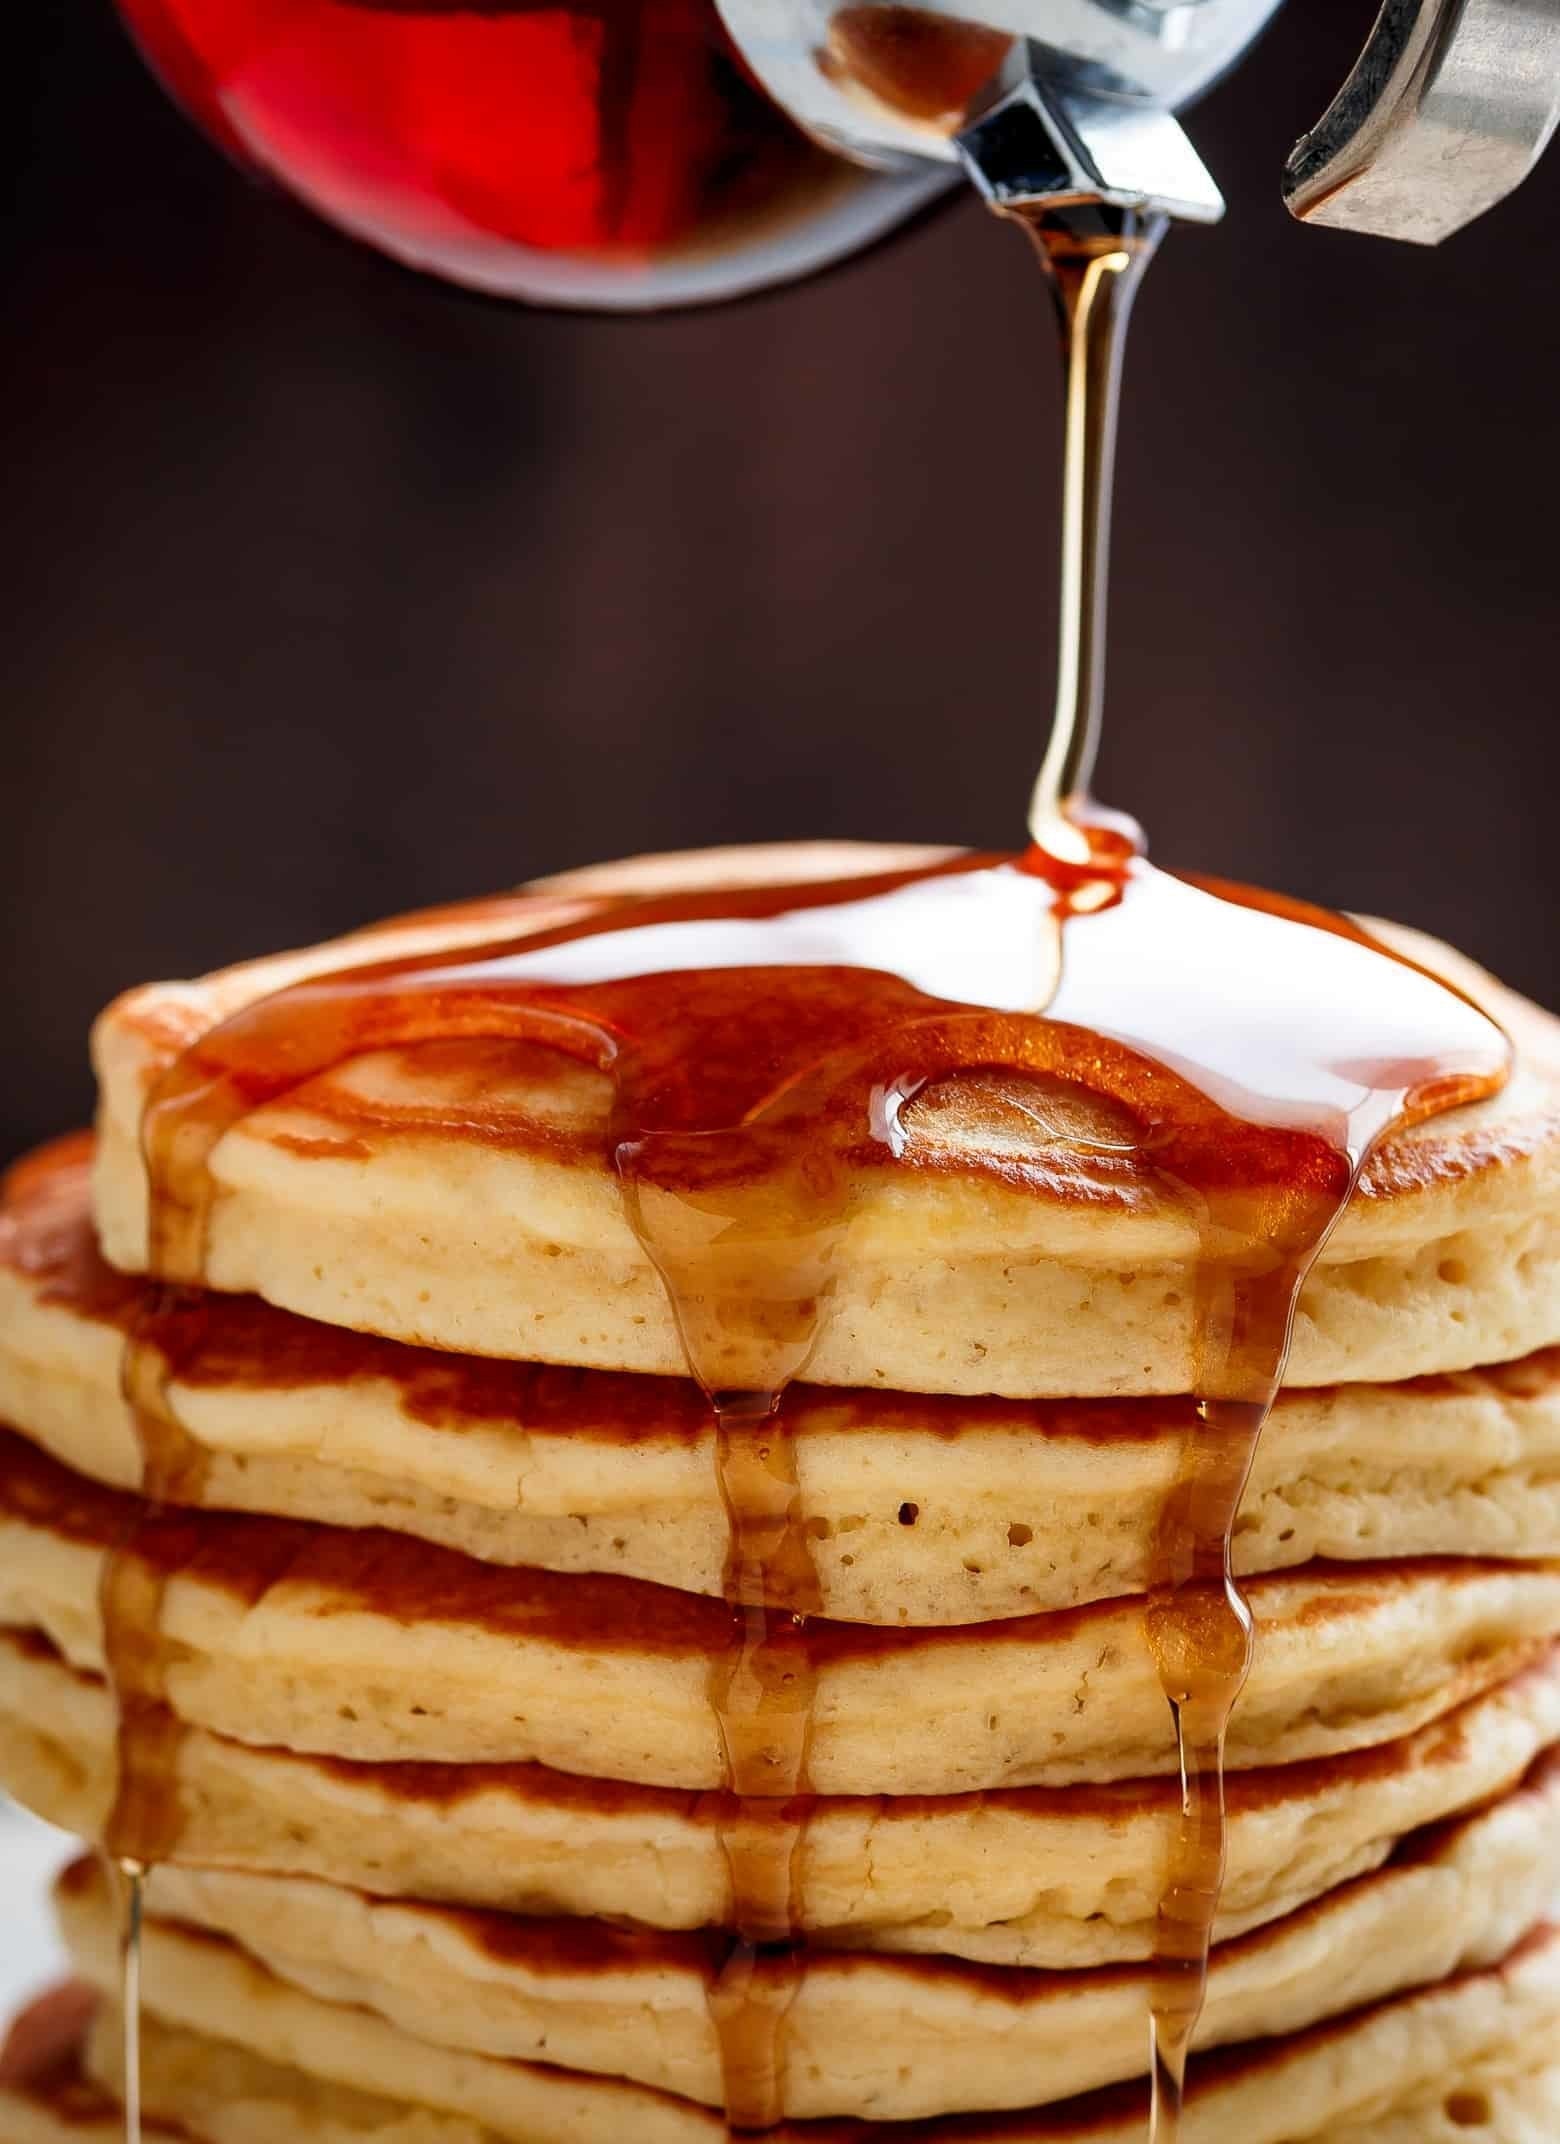 Fluffy pancakes topped with syrup.